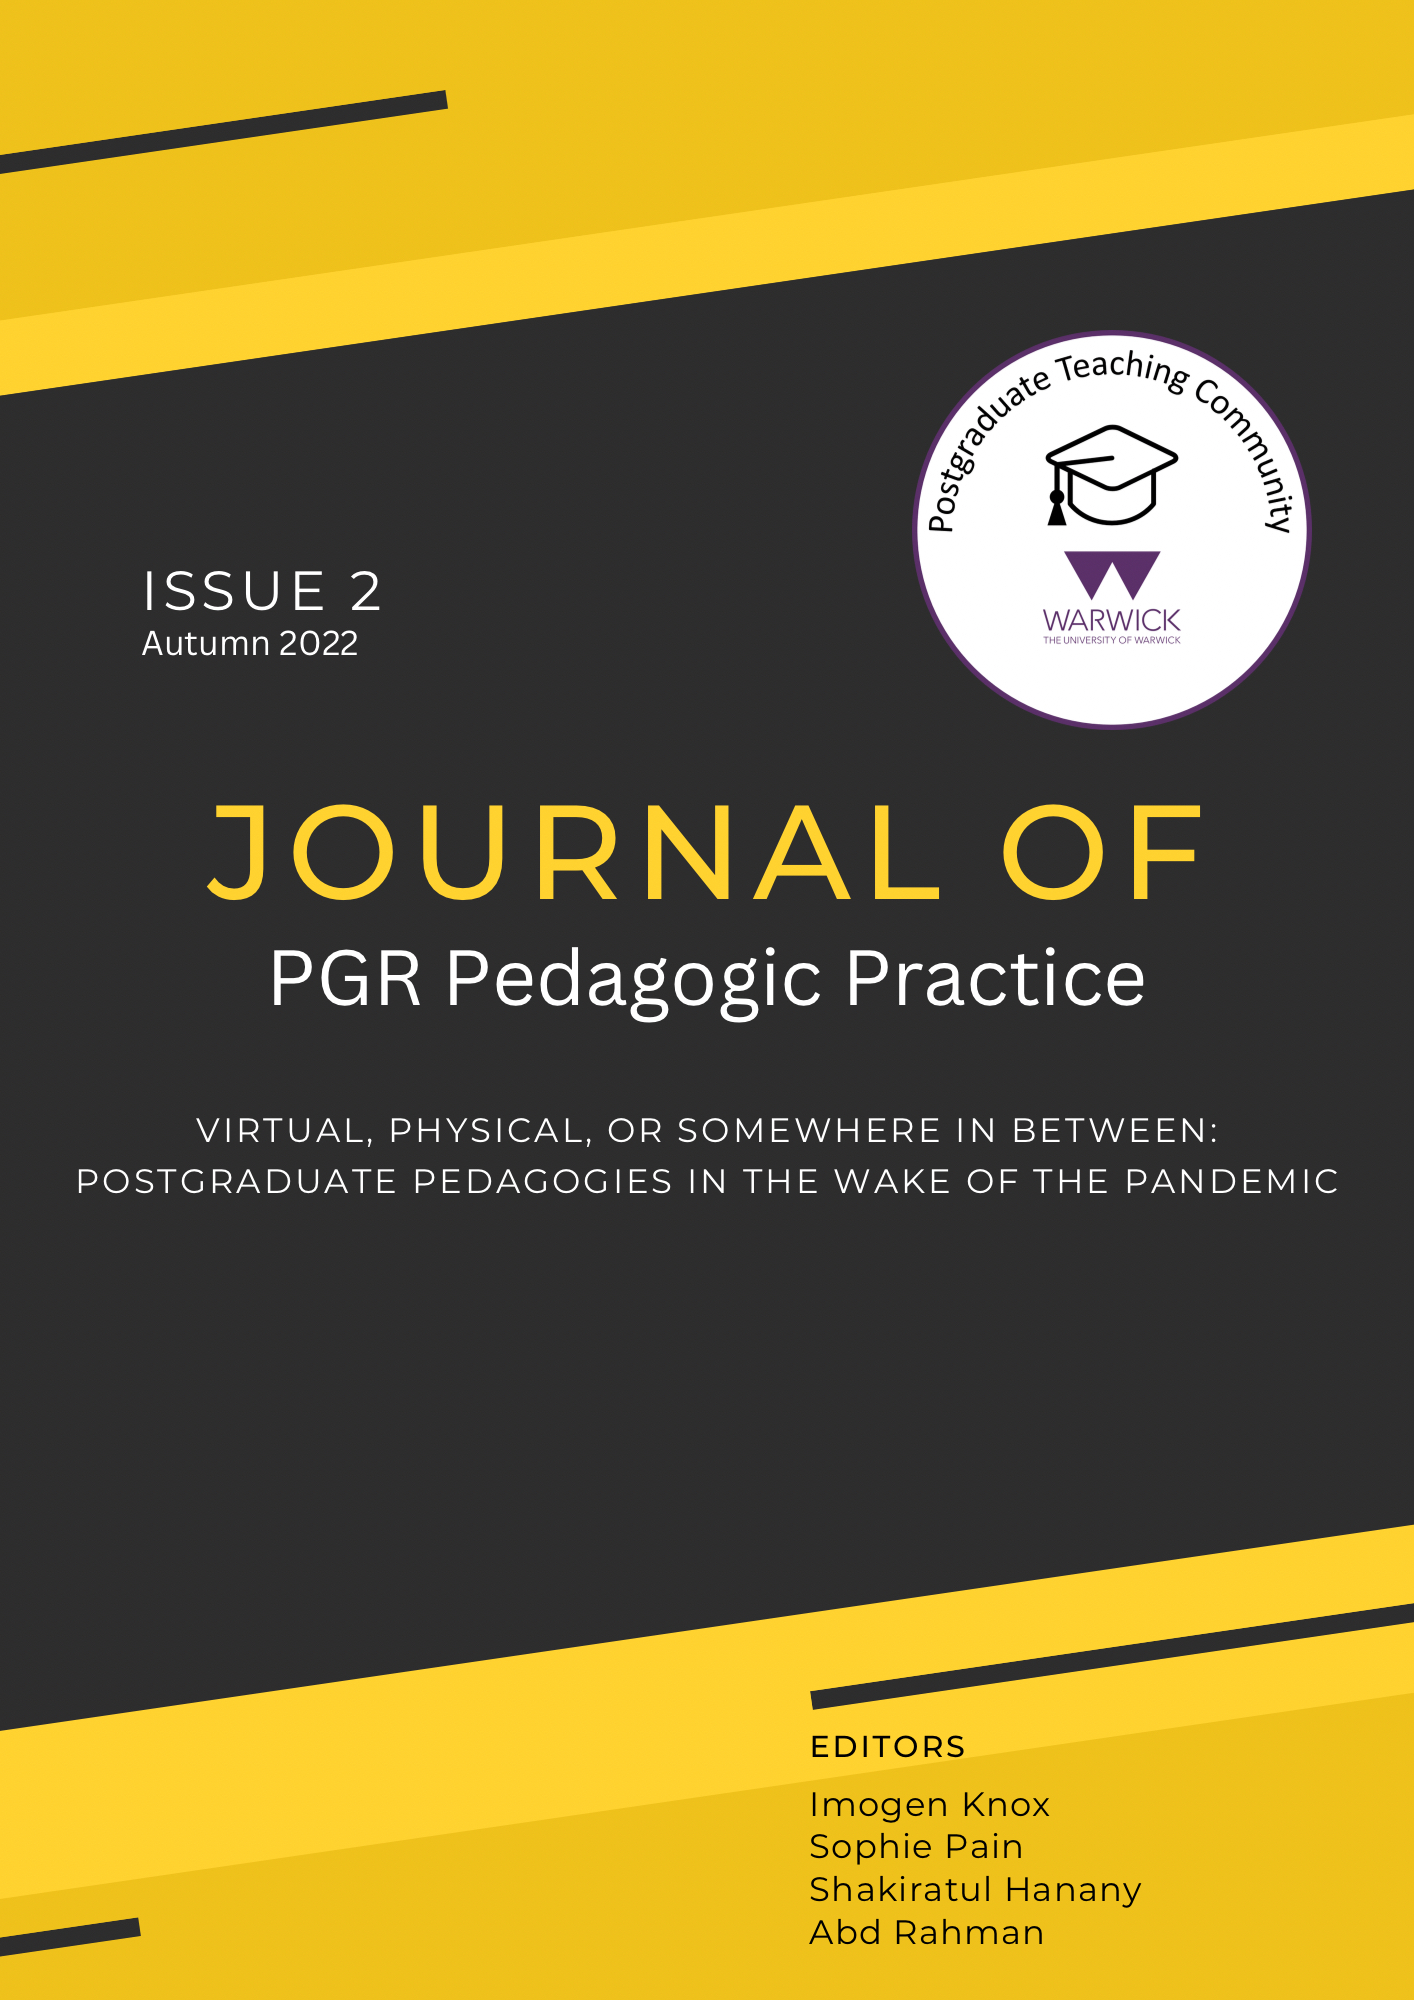 Journal of PGR Pedagogic Practice Issue 2 Cover